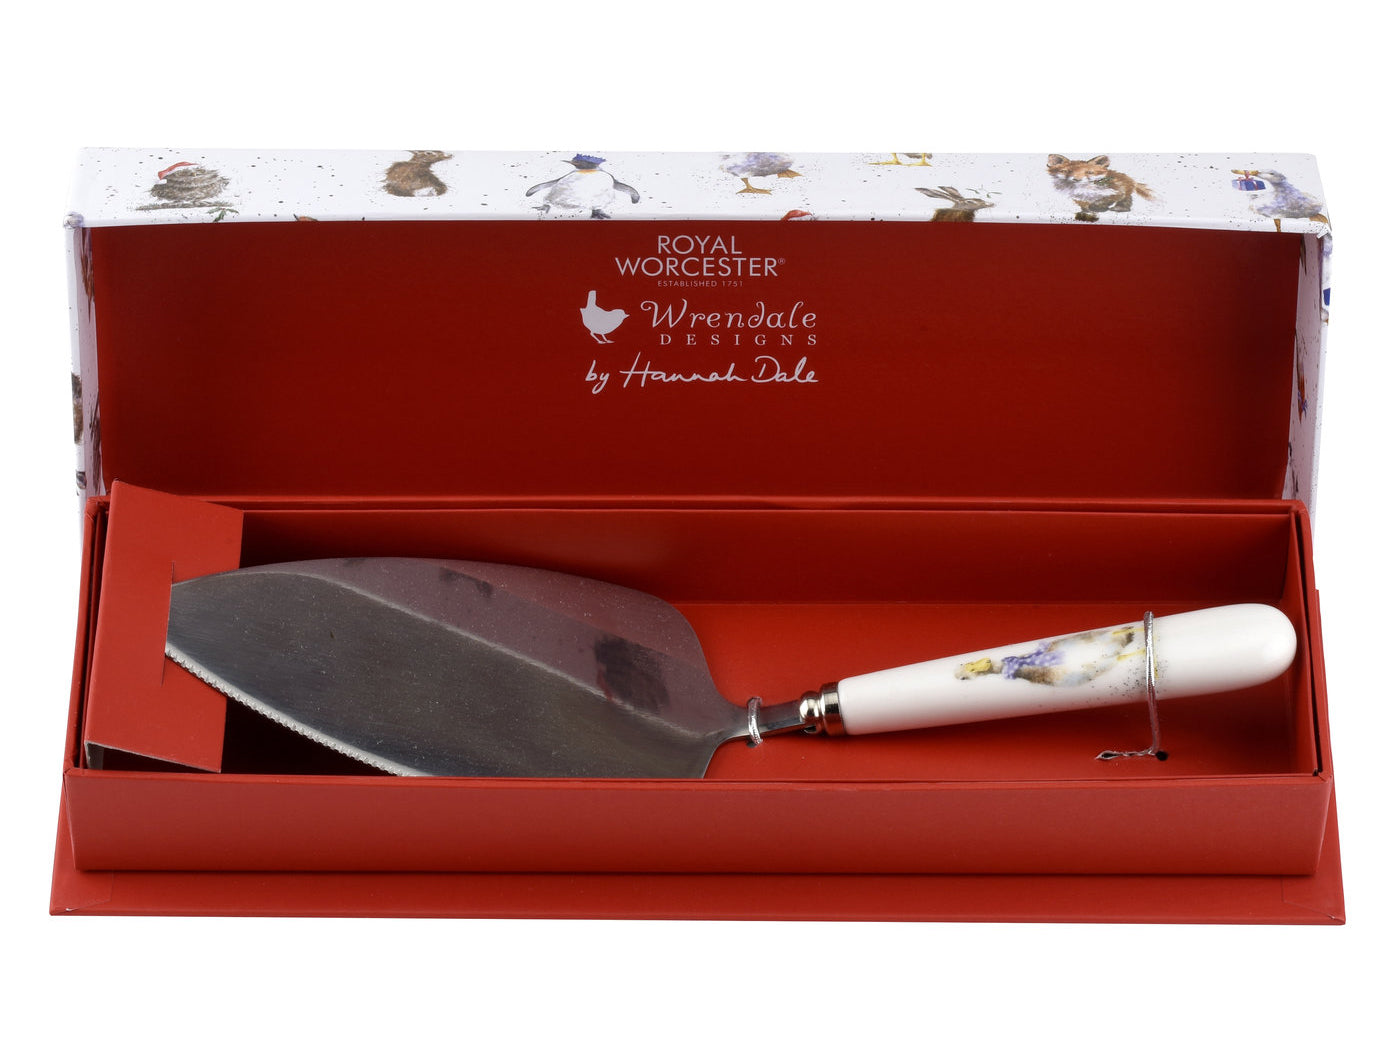 A silver cake slice with a white porcelain handle with a duck illustration on it, presented in a red and white gift box with animal illustrations on the lid